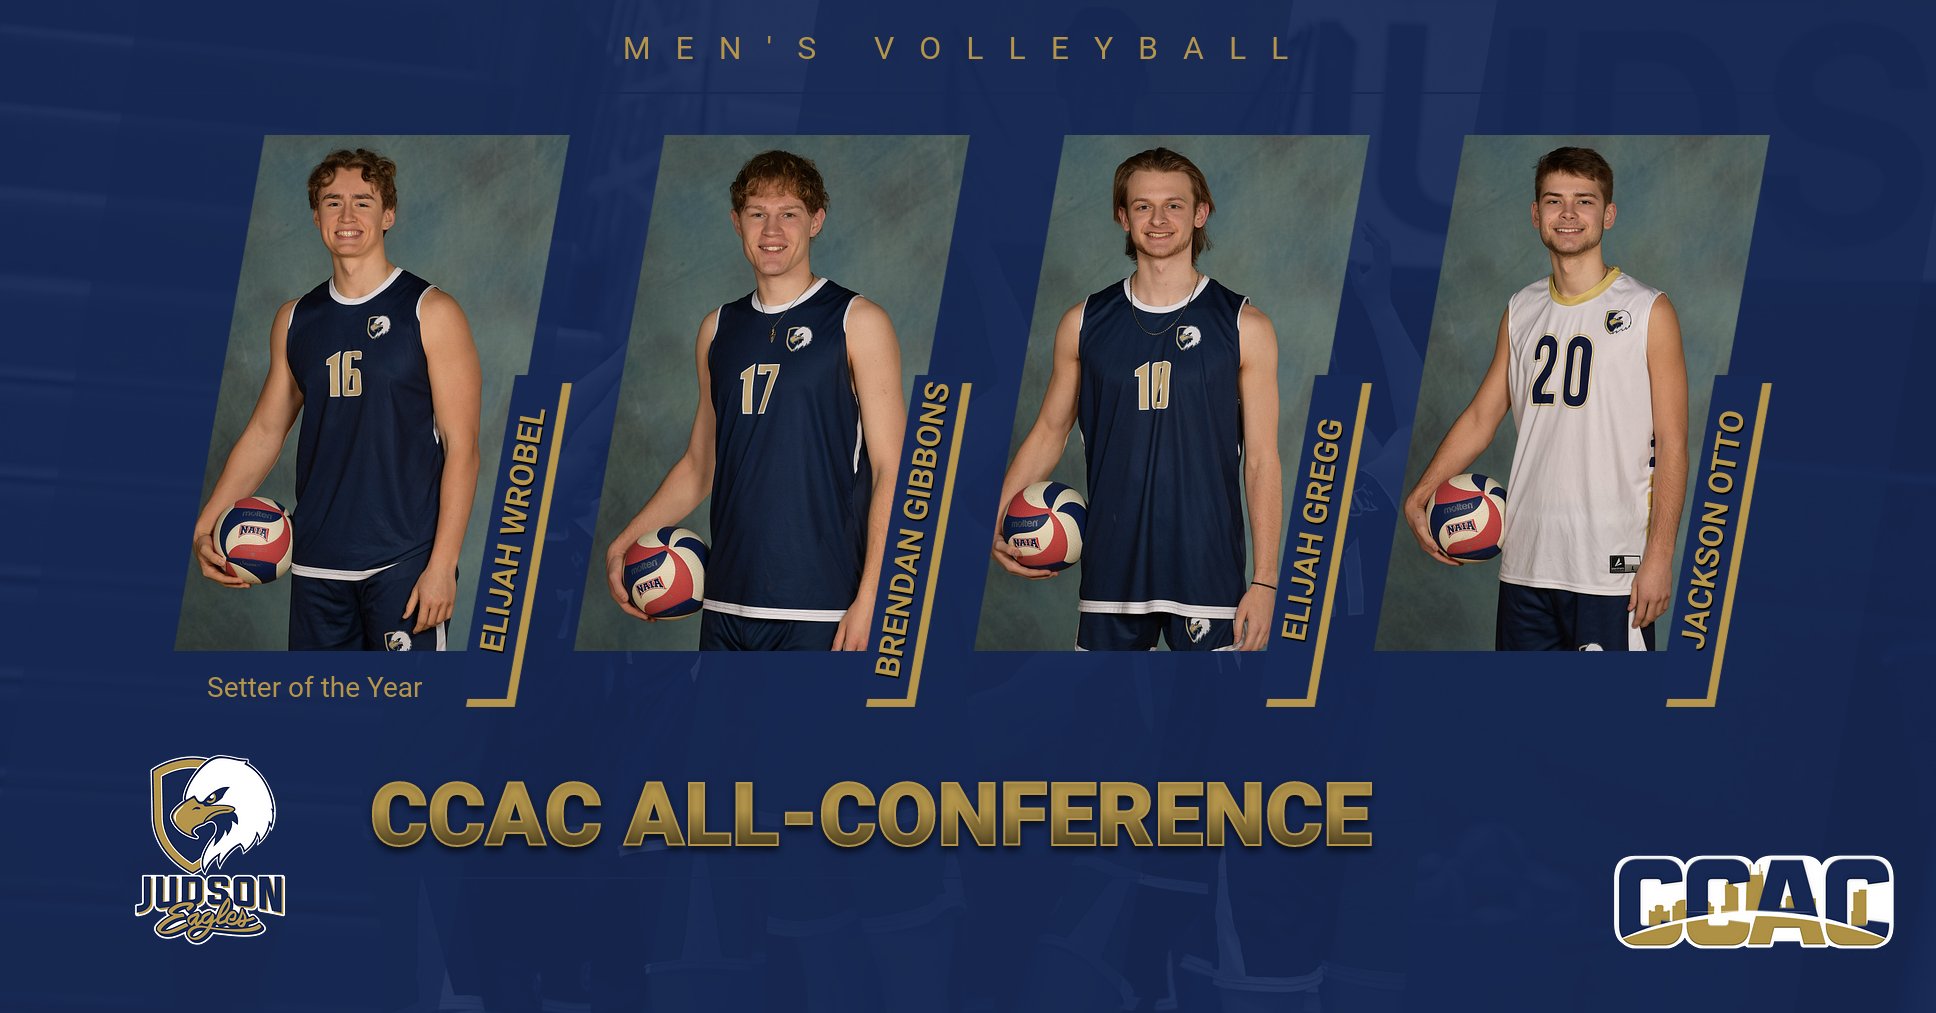 Four Eagles Named CCAC All-Conference Members; Wrobel Setter of the Year